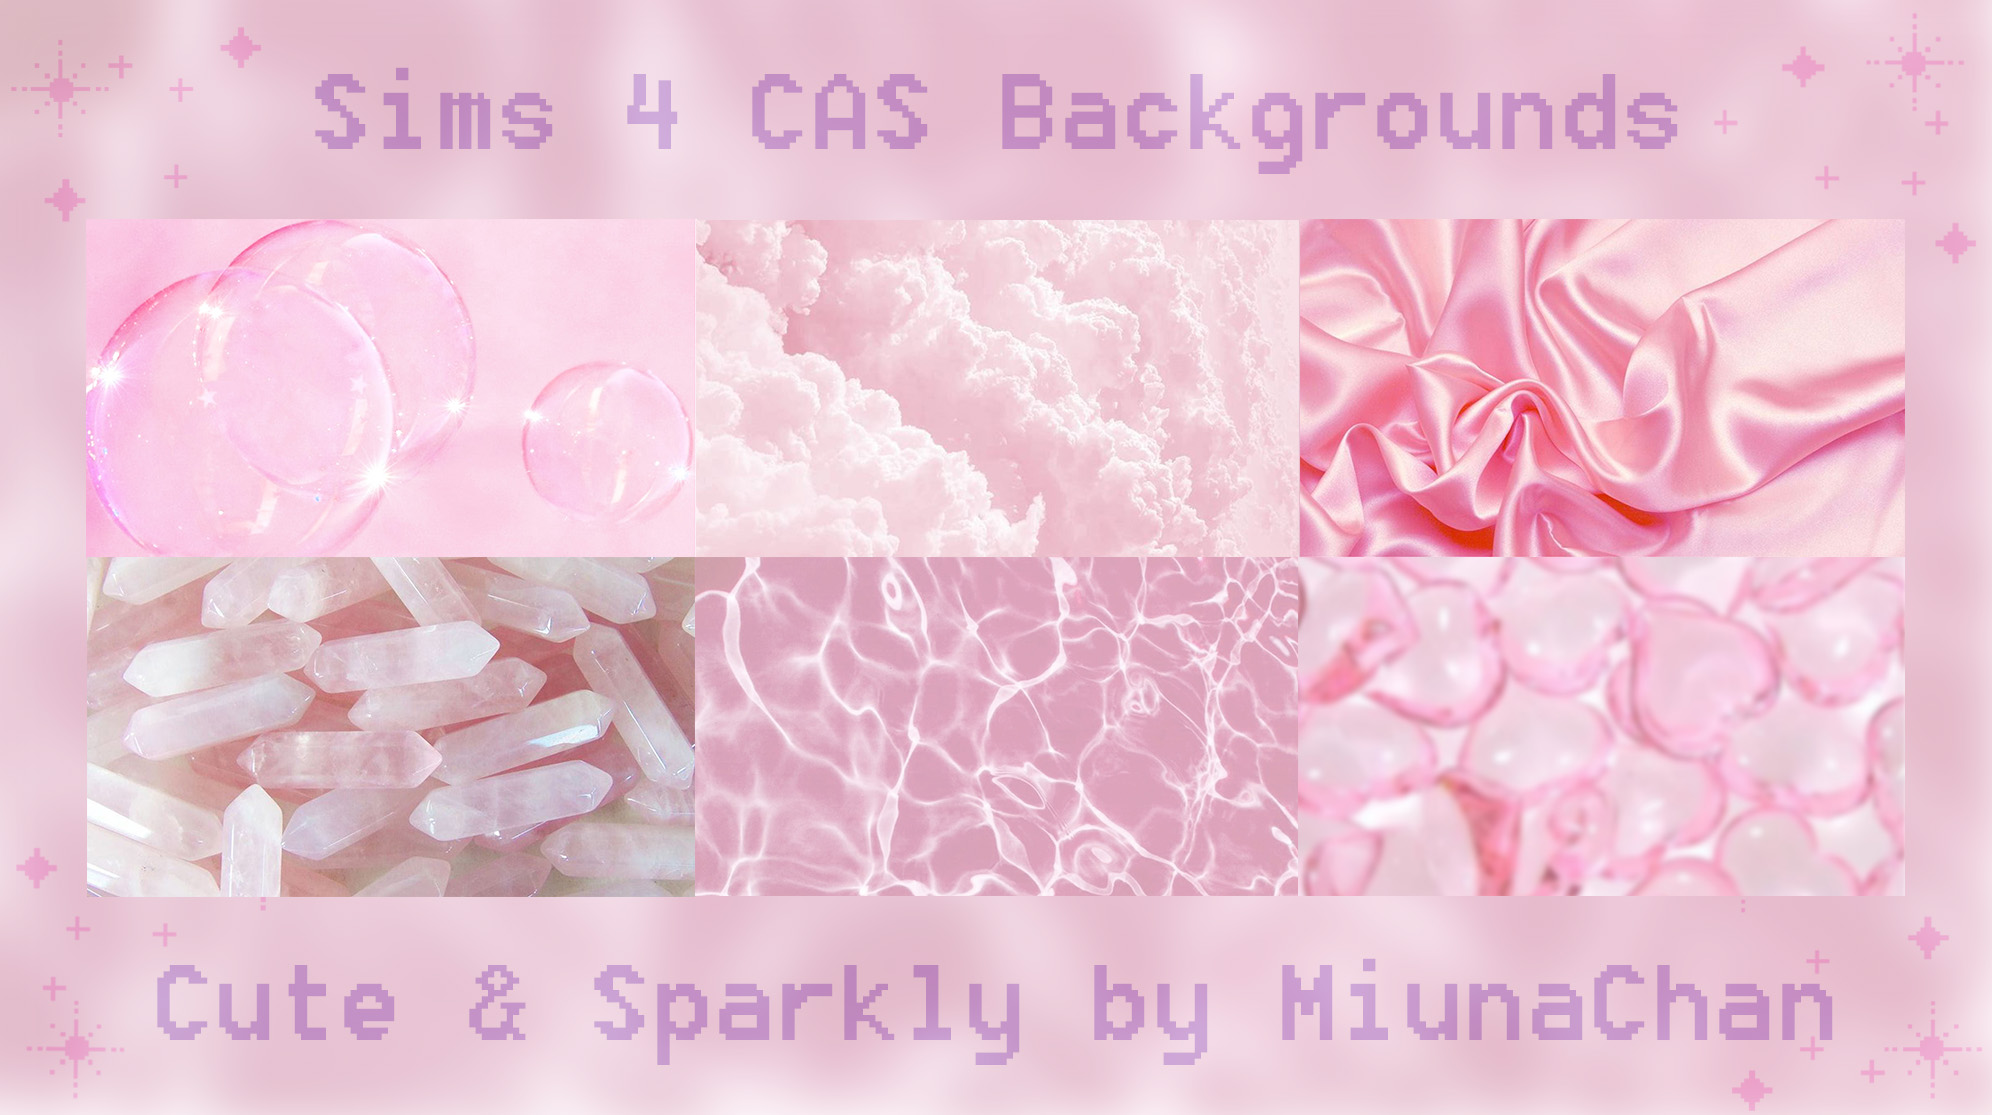 Download 200 Sims 4 cas background with mirror pink in high quality